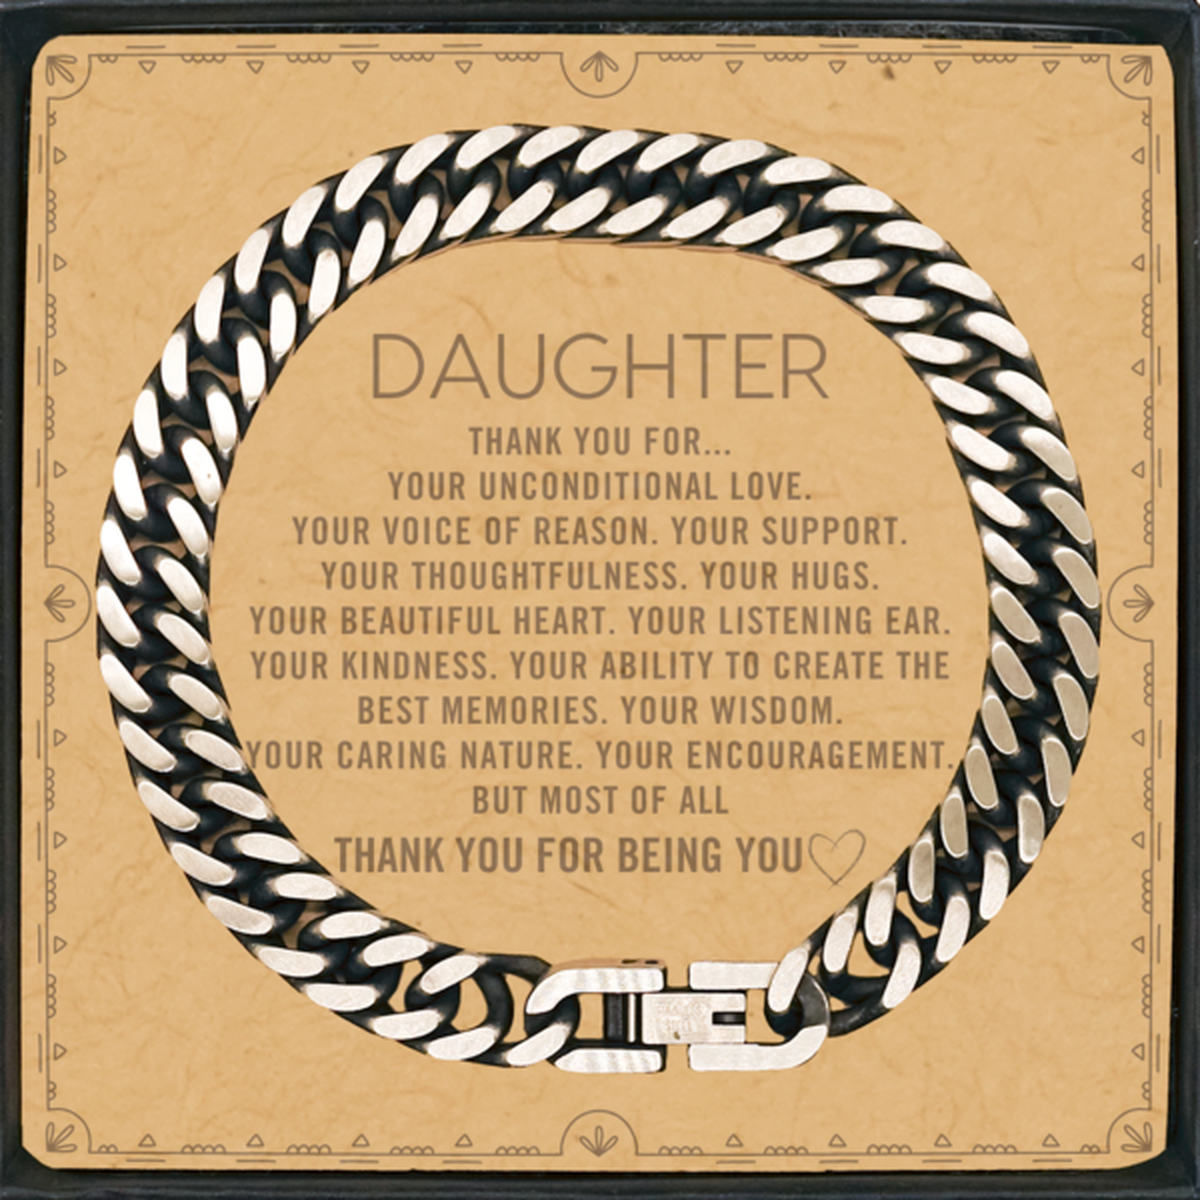 Daughter Cuban Link Chain Bracelet Custom, Message Card Gifts For Daughter Christmas Graduation Birthday Gifts for Men Women Daughter Thank you for Your unconditional love